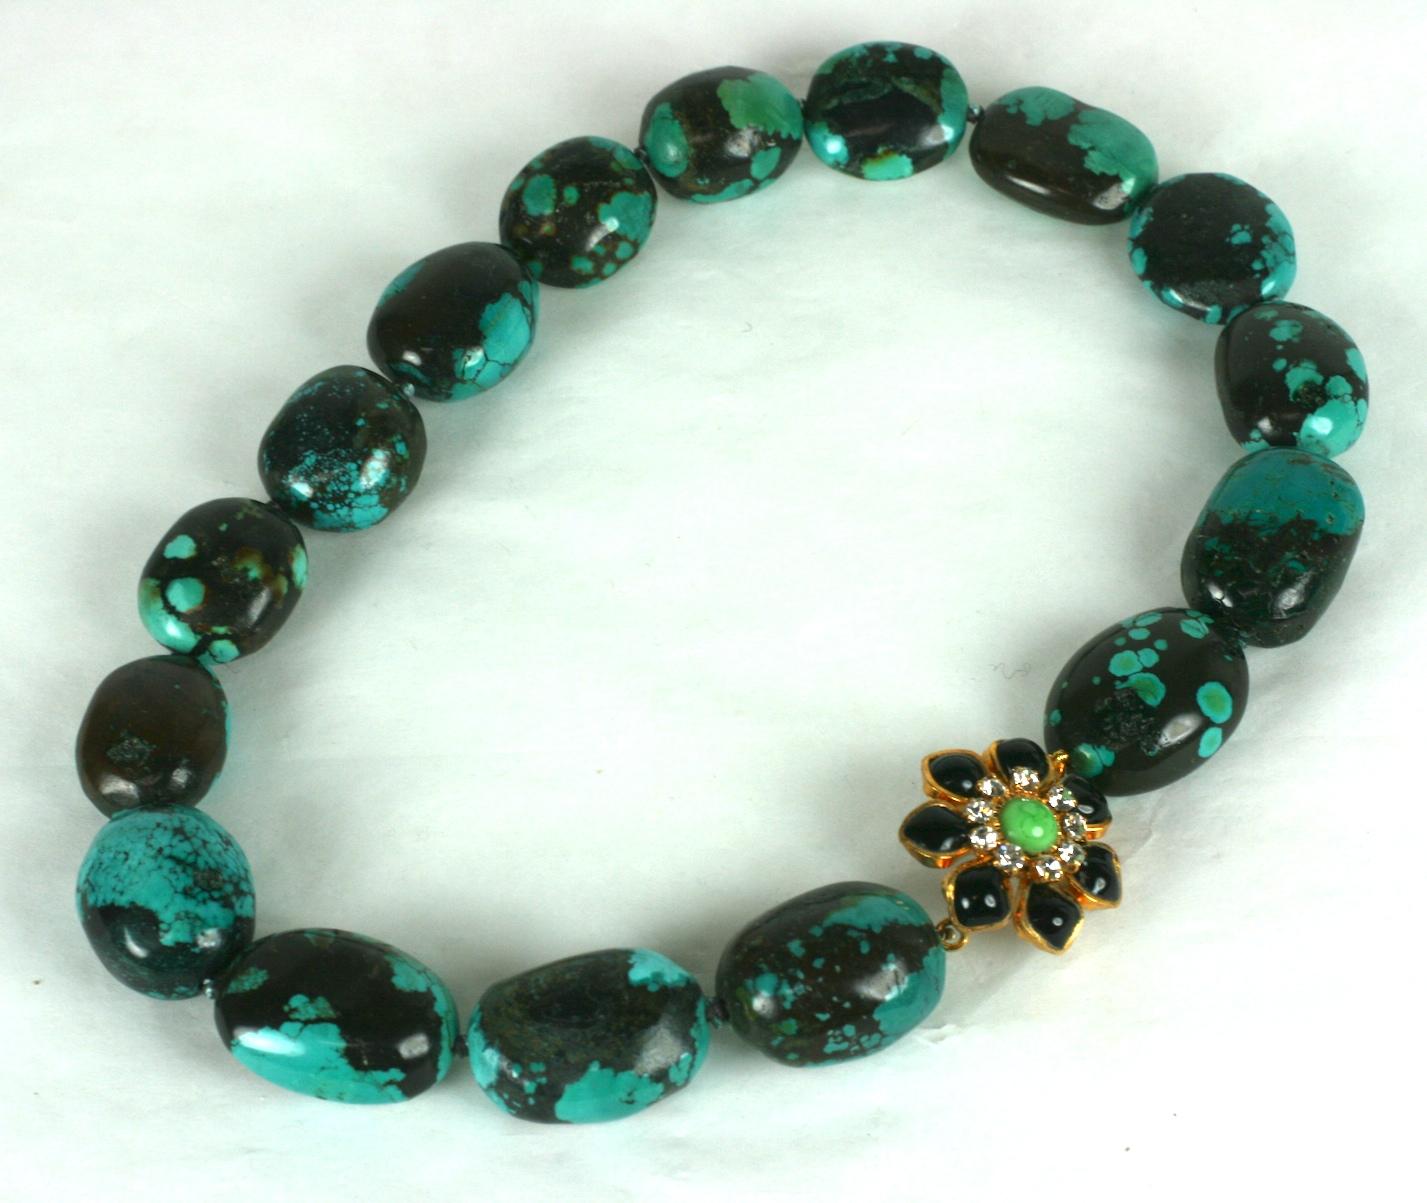 Matrix turquoise hand knotted oval beads with hand made poured glass Marguerite floral clasp in jet and vibrant jade poured glass enamel with crystal rhinestone accents. Hand made in our studios in France. 
MWLC 